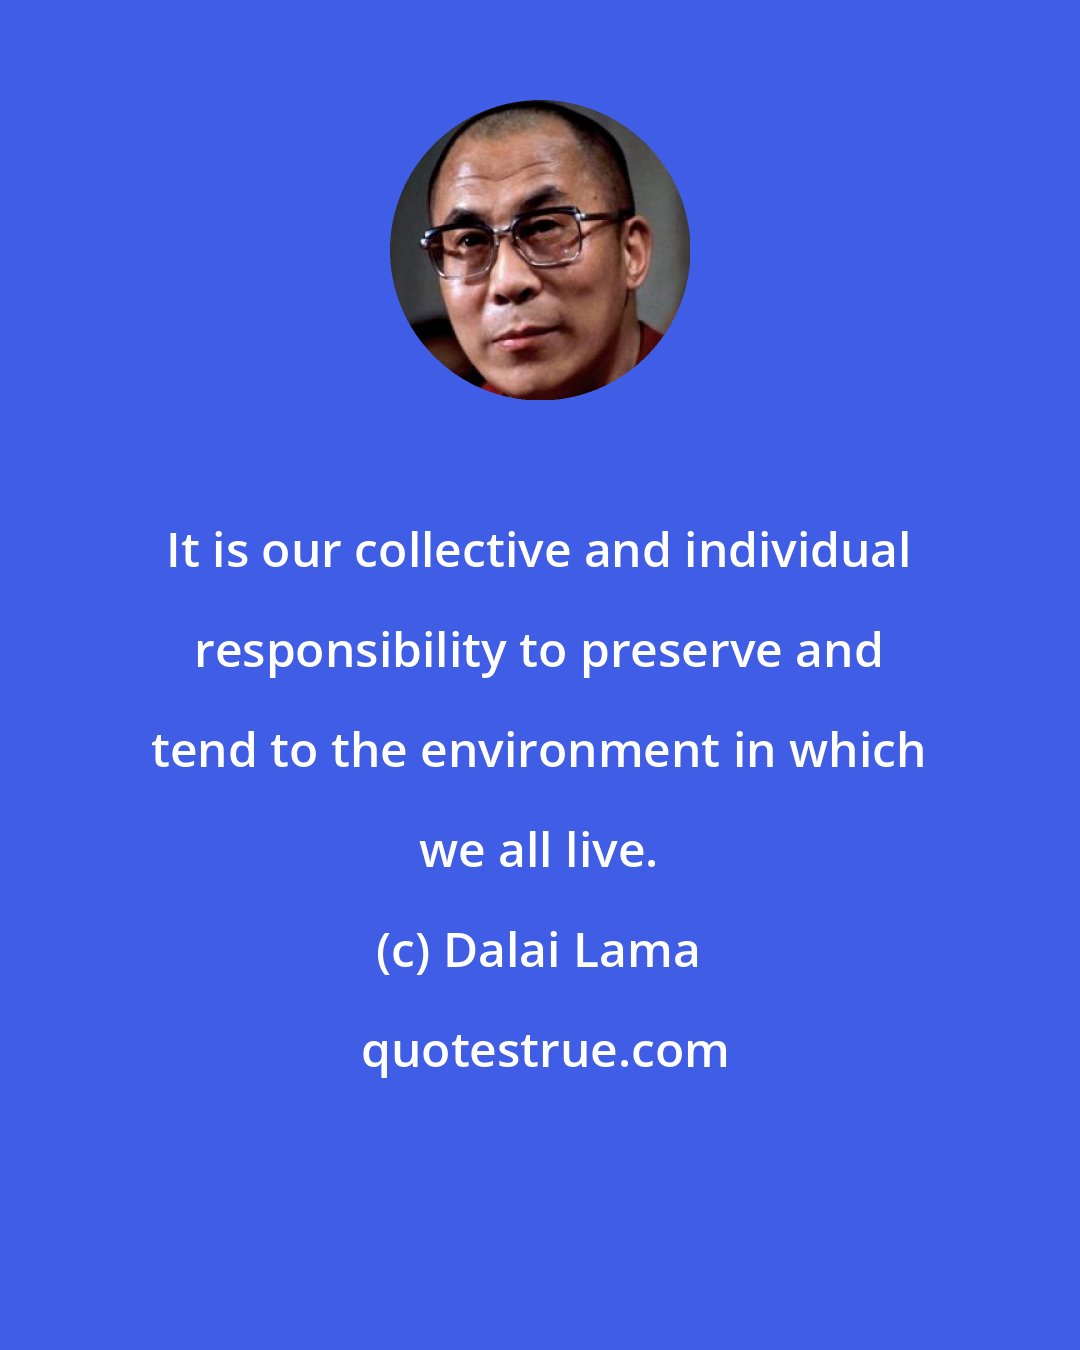 Dalai Lama: It is our collective and individual responsibility to preserve and tend to the environment in which we all live.